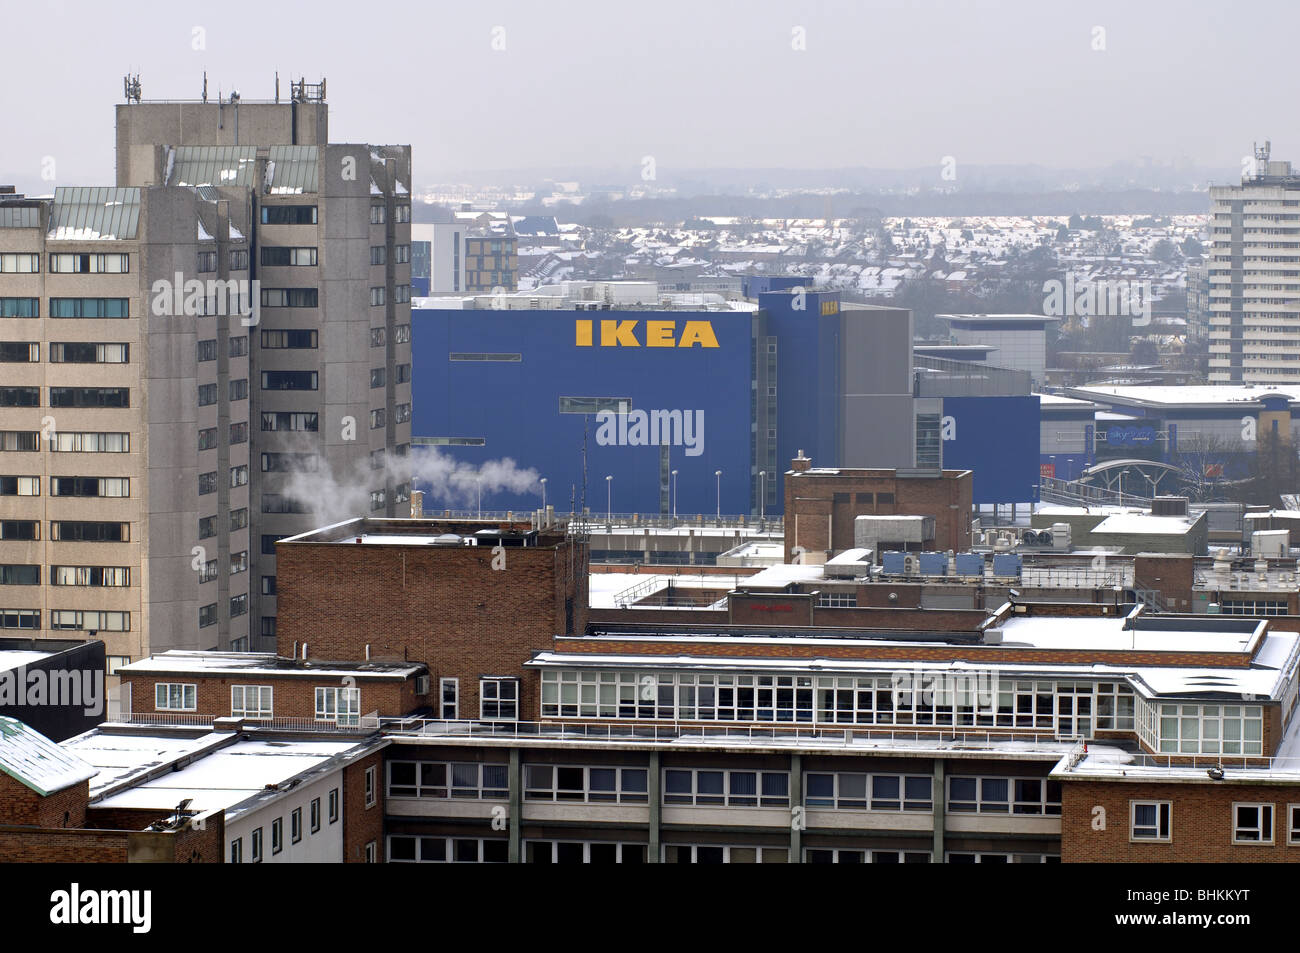 Coventry city centre including Ikea store in winter with snow from Old Cathedral tower, England, UK Stock Photo